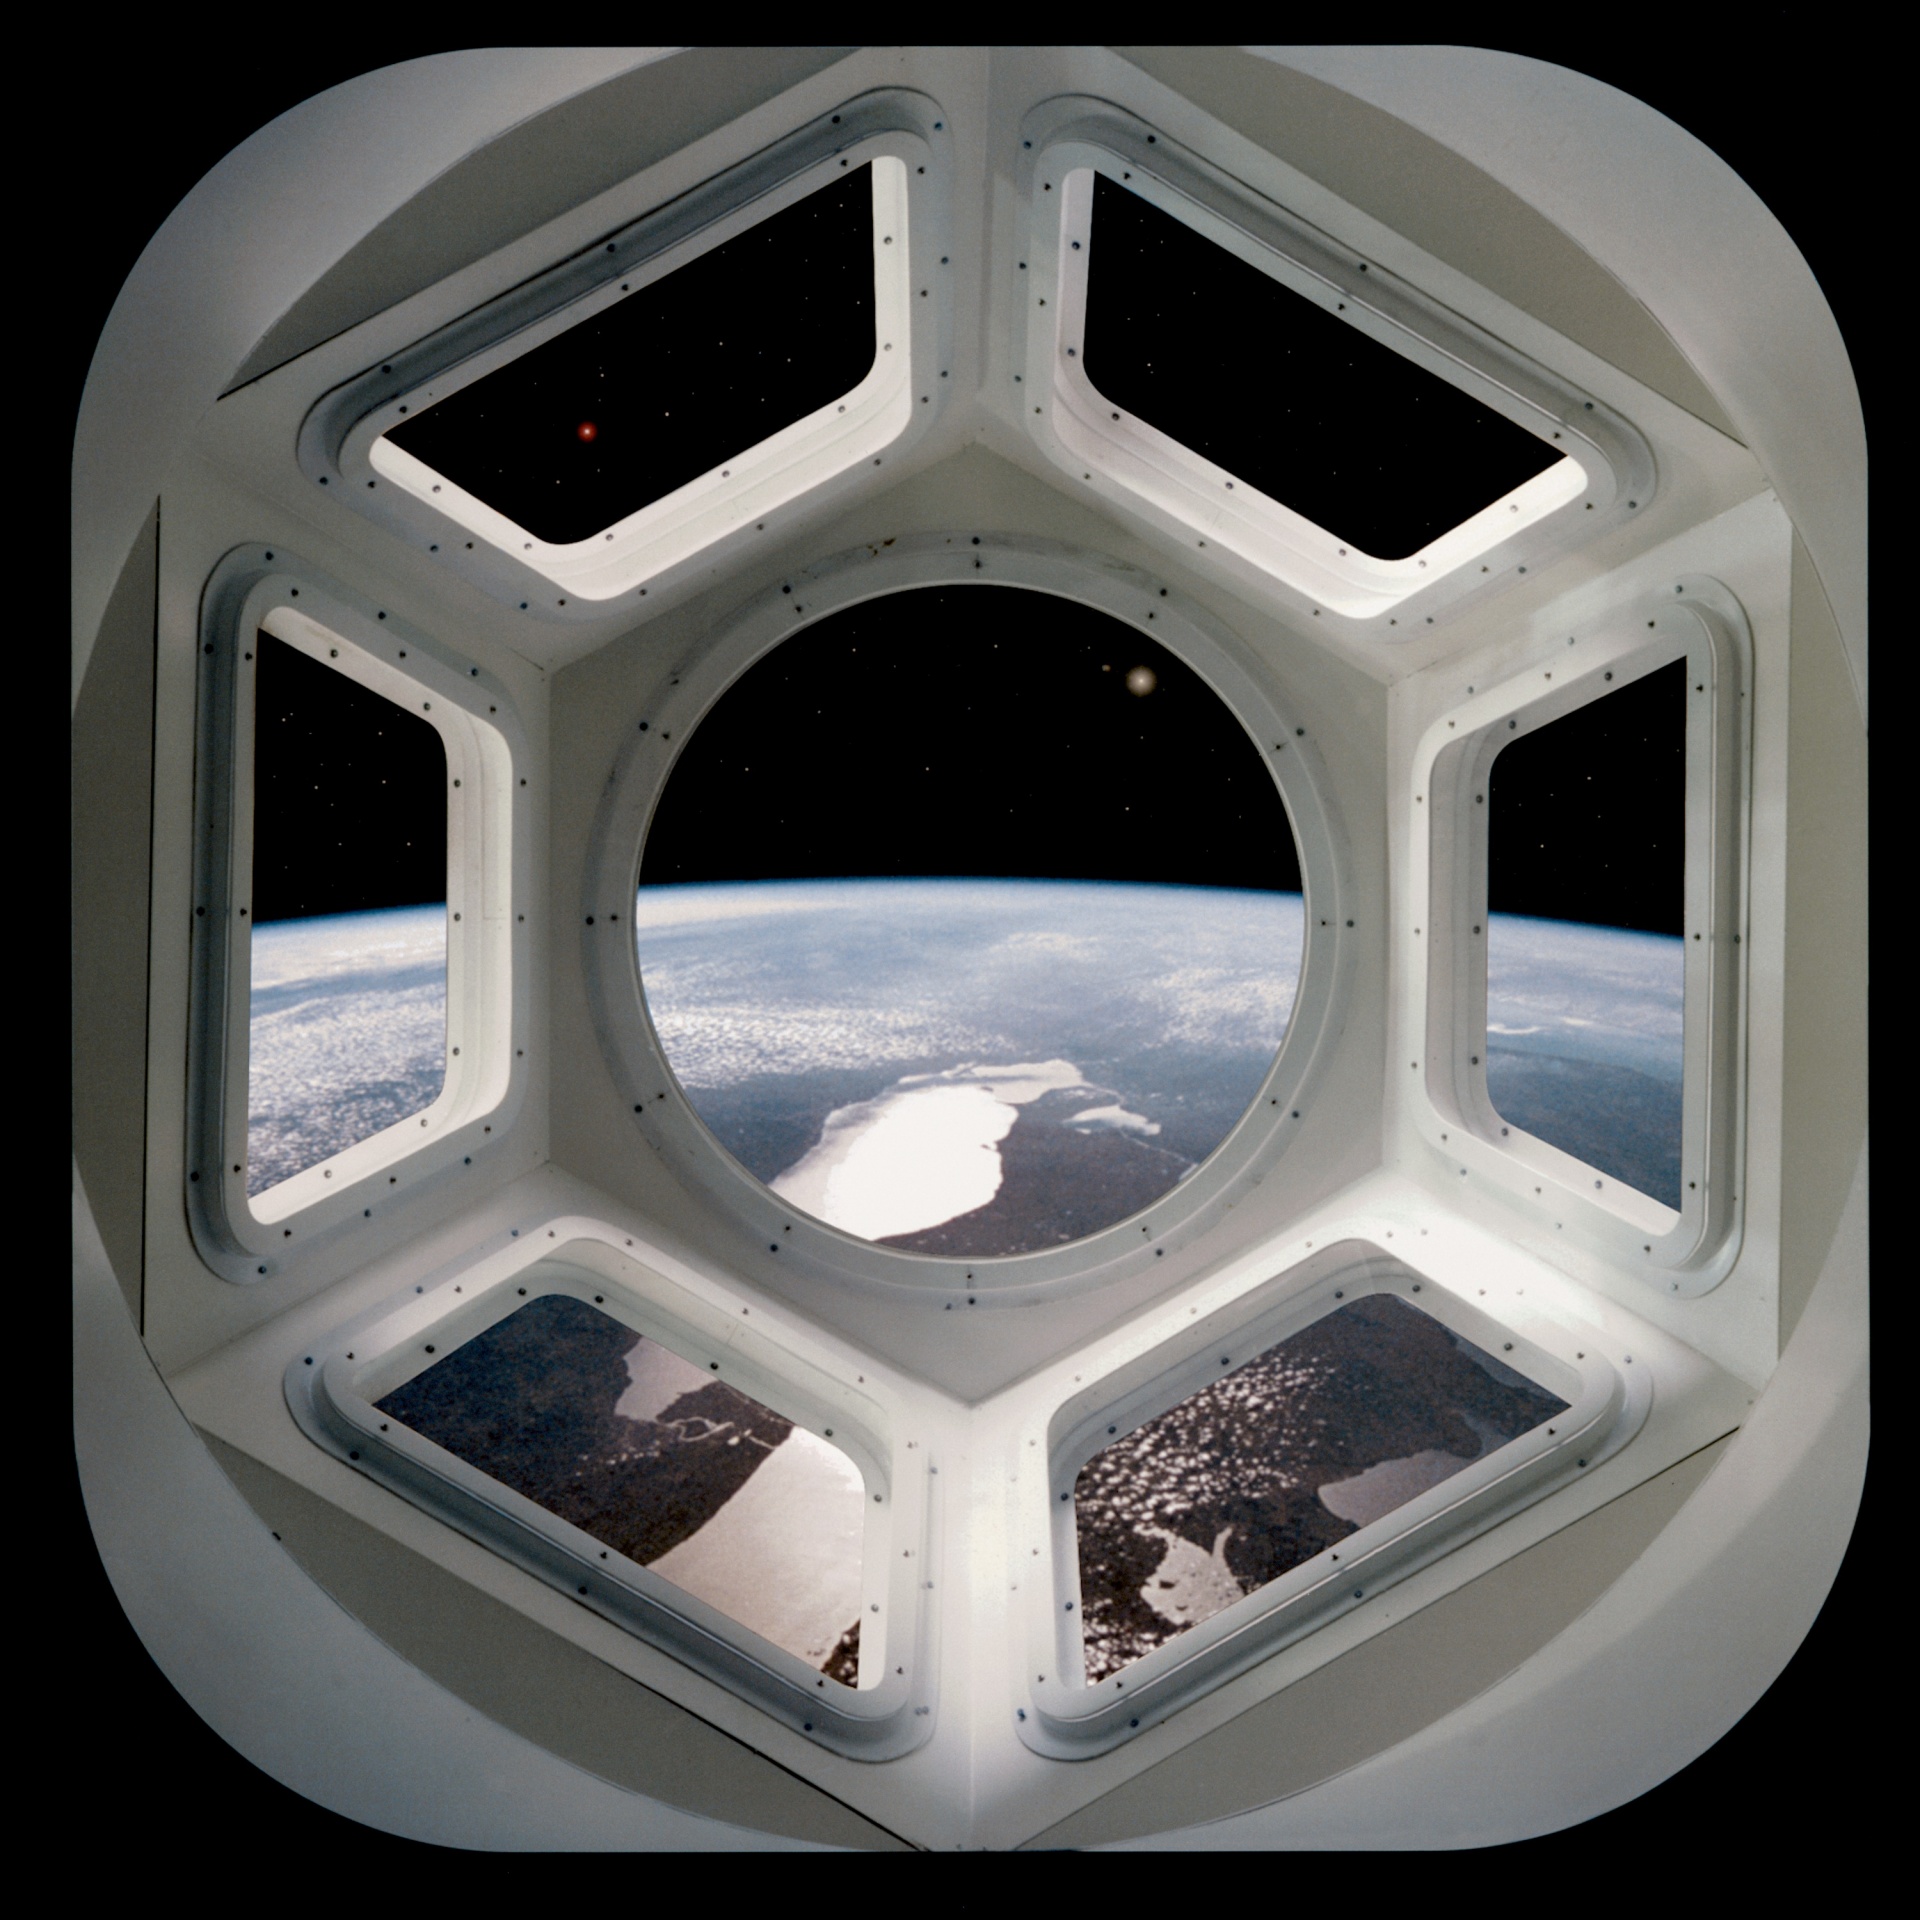 Space Station International Cupola Interior Iss Free Image